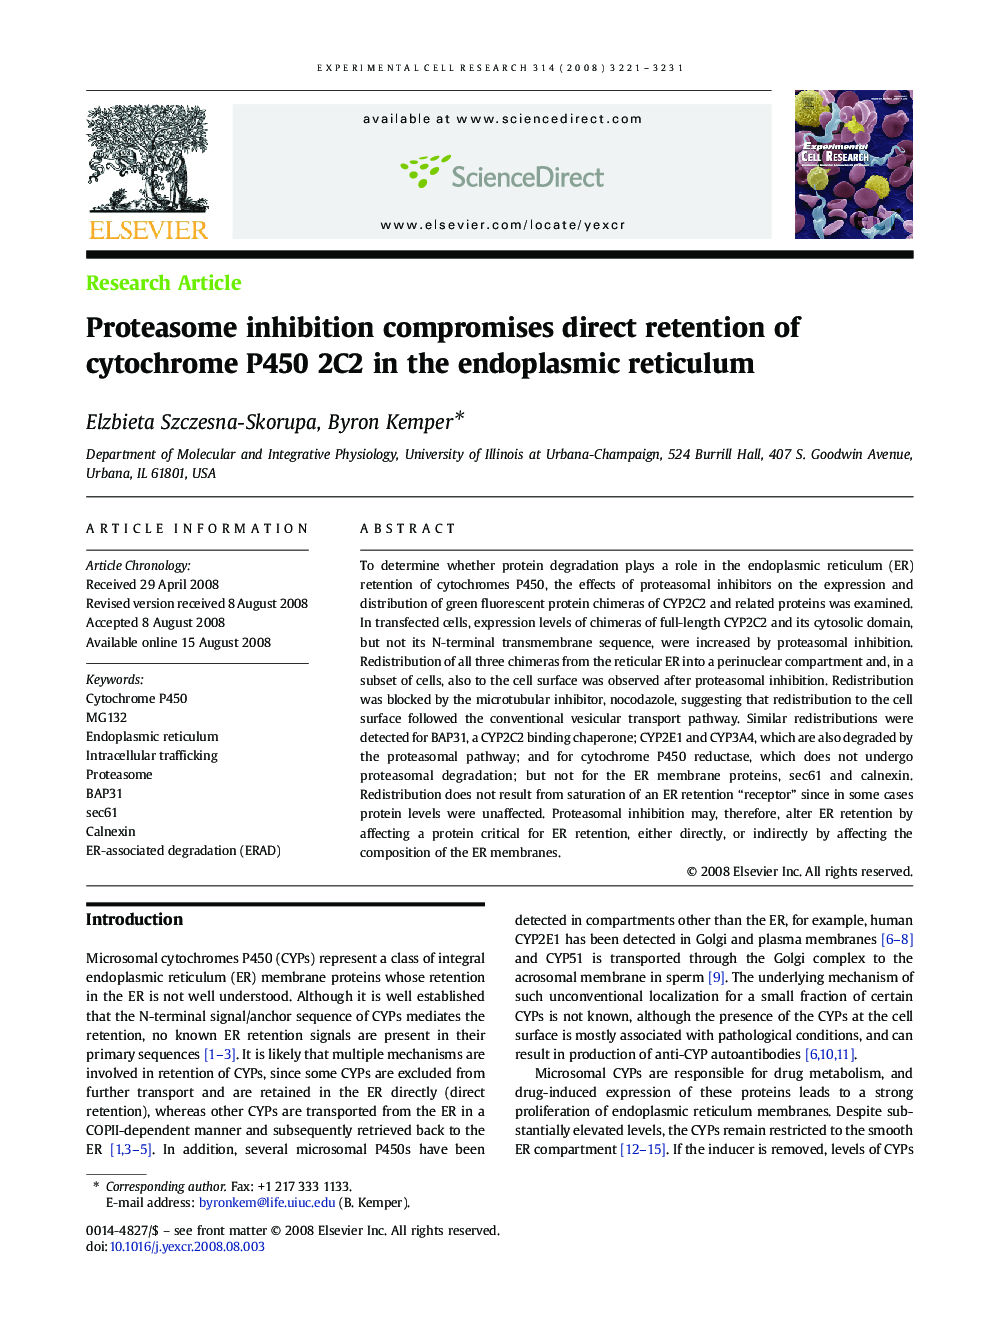 Proteasome inhibition compromises direct retention of cytochrome P450 2C2 in the endoplasmic reticulum